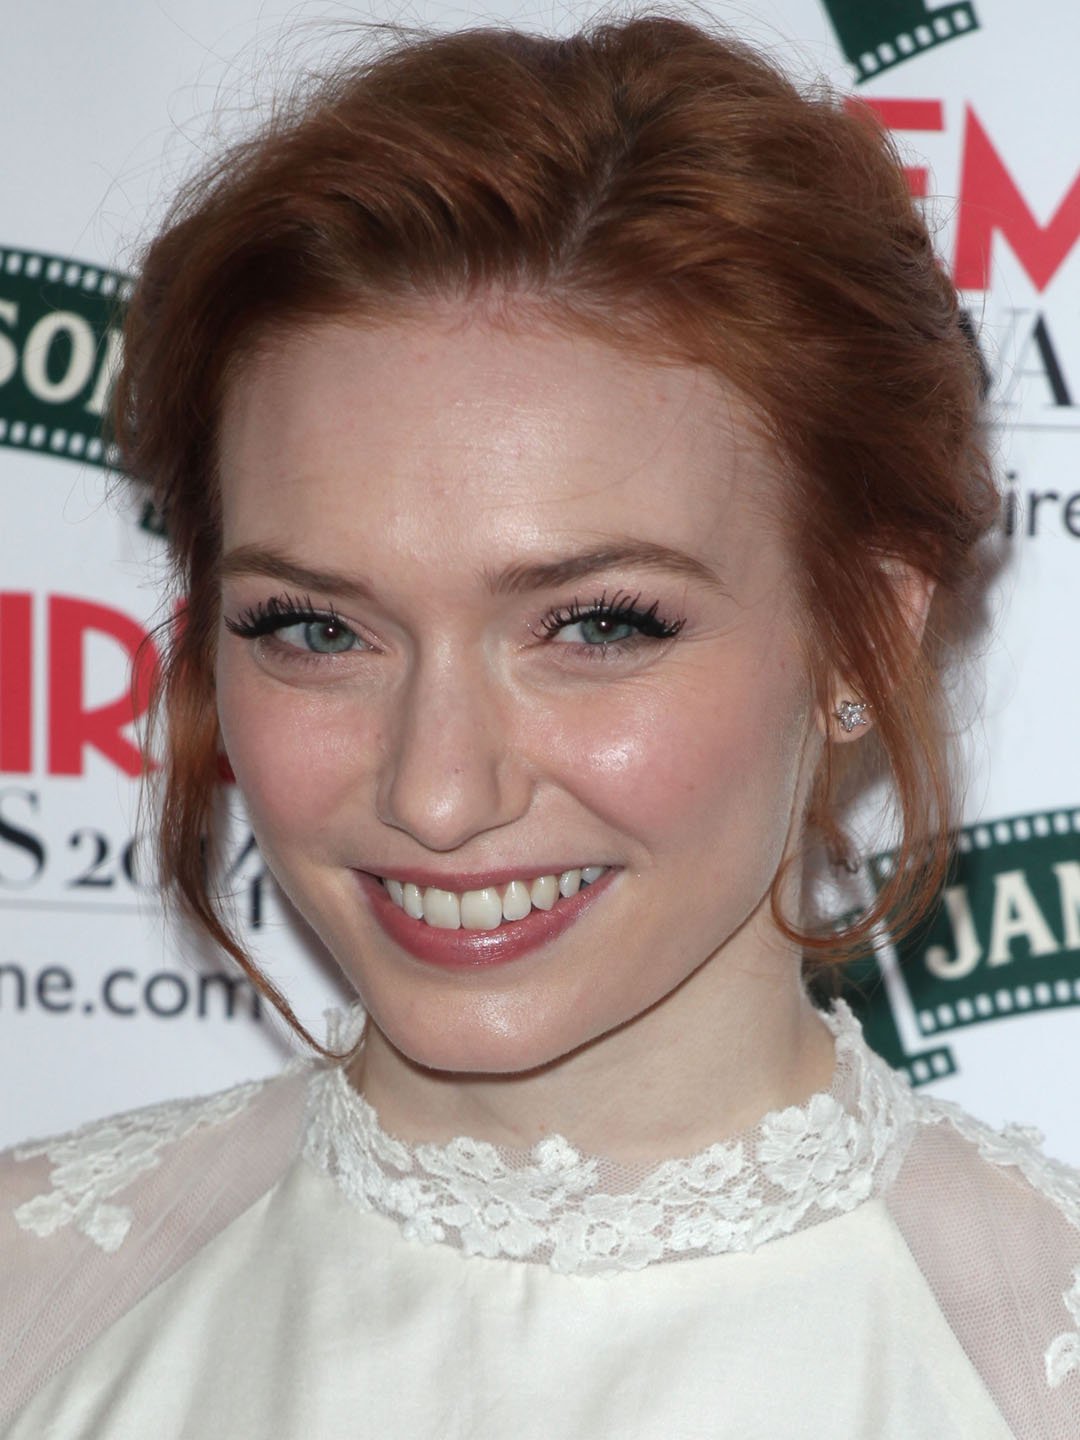 How tall is Eleanor Tomlinson?